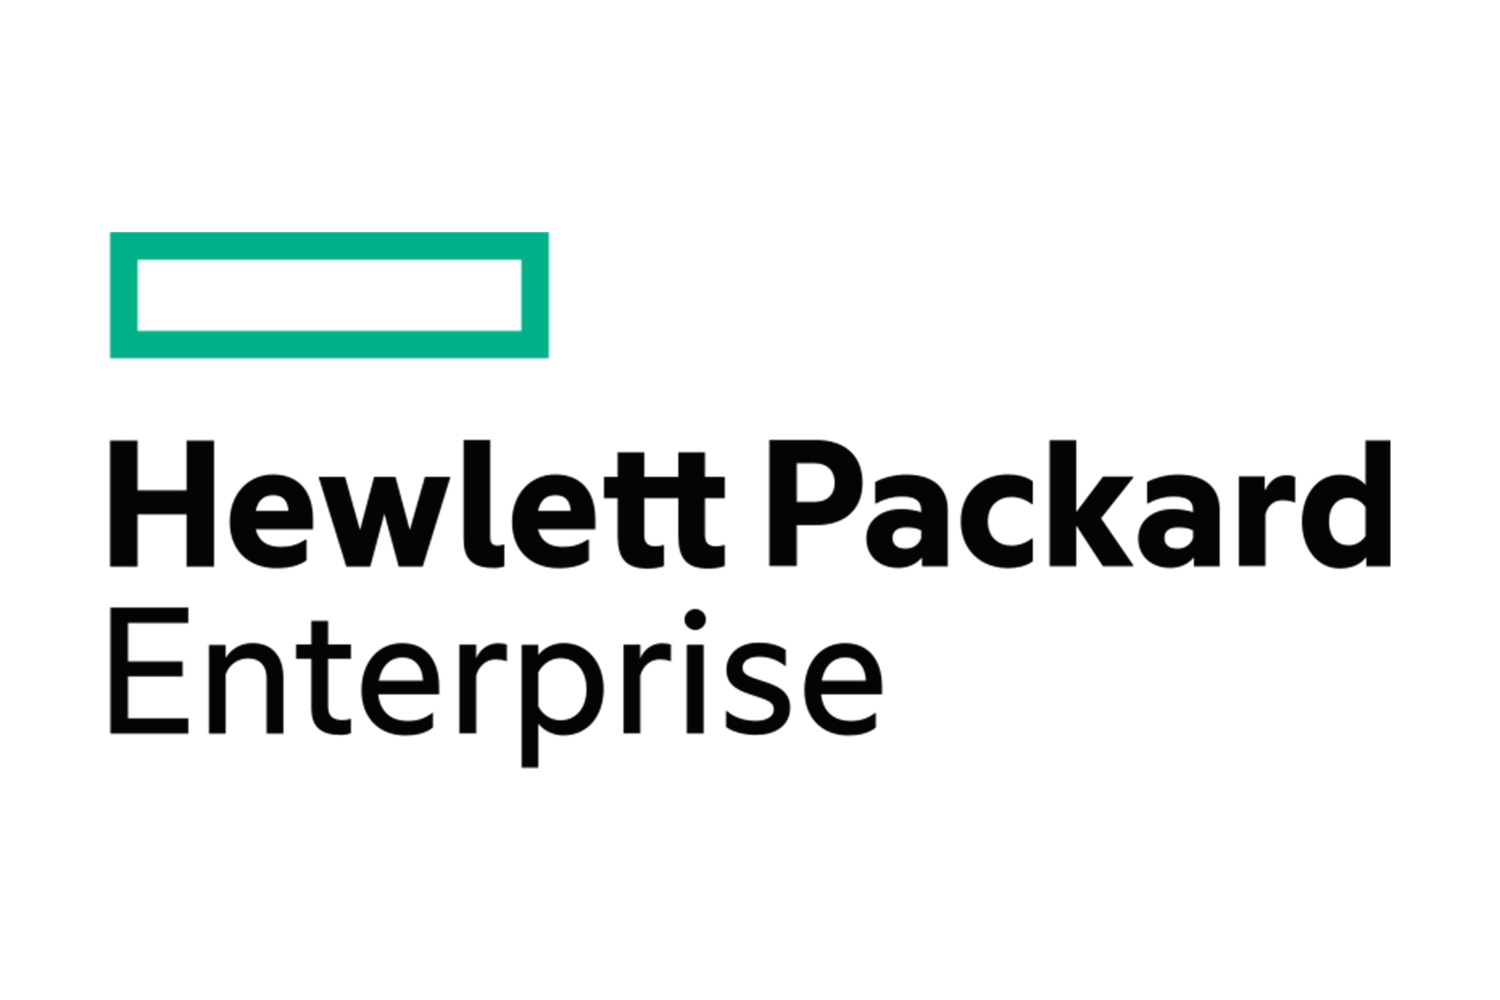 HPE HPE_logo.png